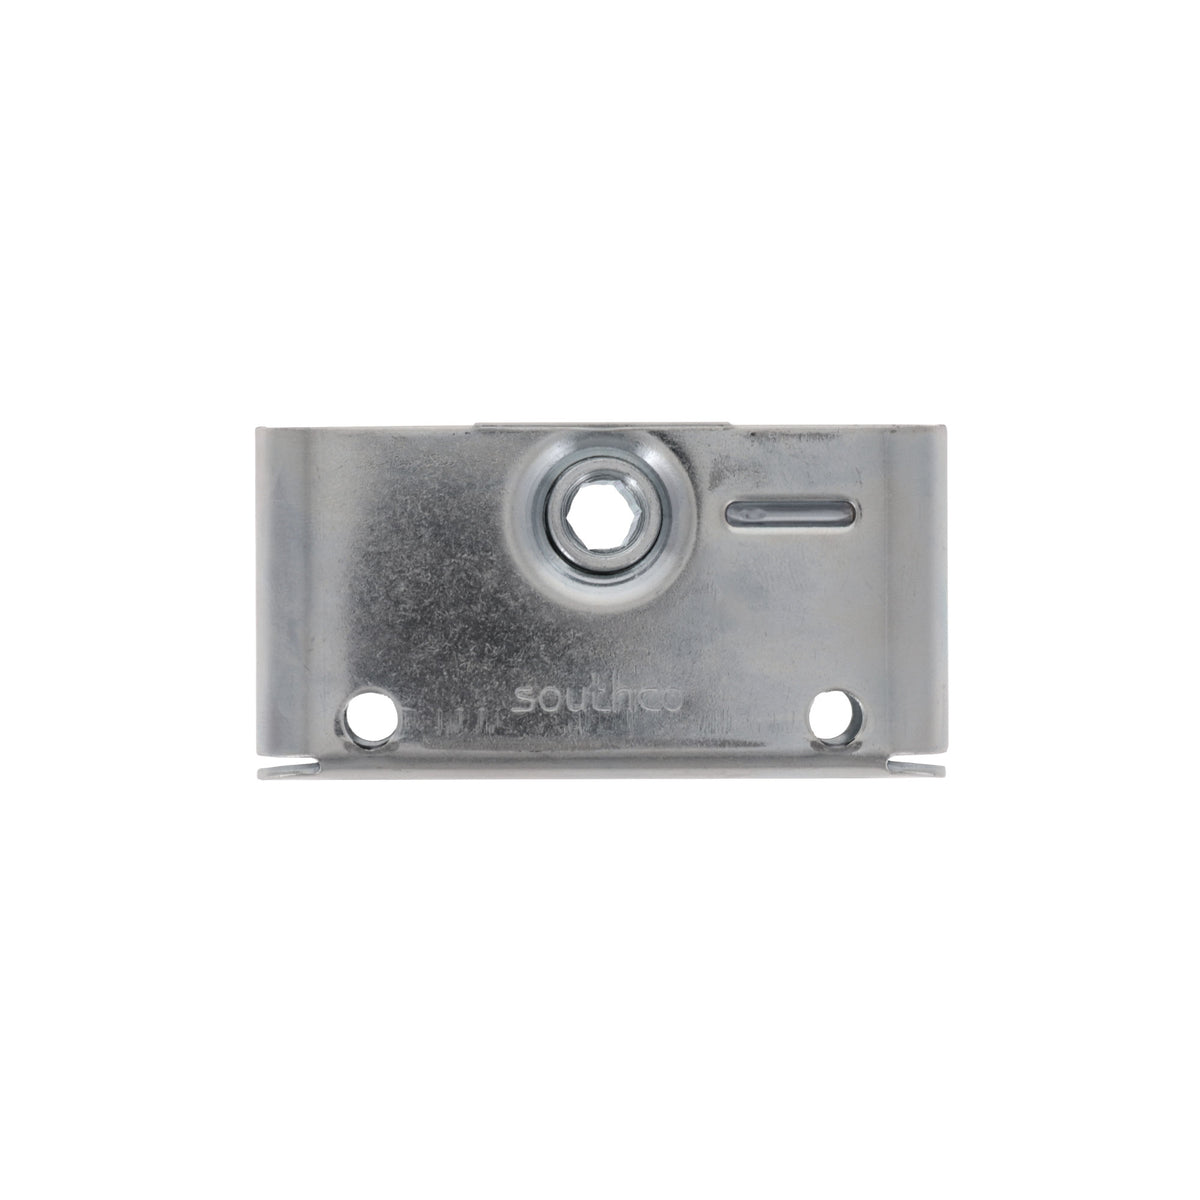 Southco Standard Roto-Lock - Latch - R2-0055-02, front view